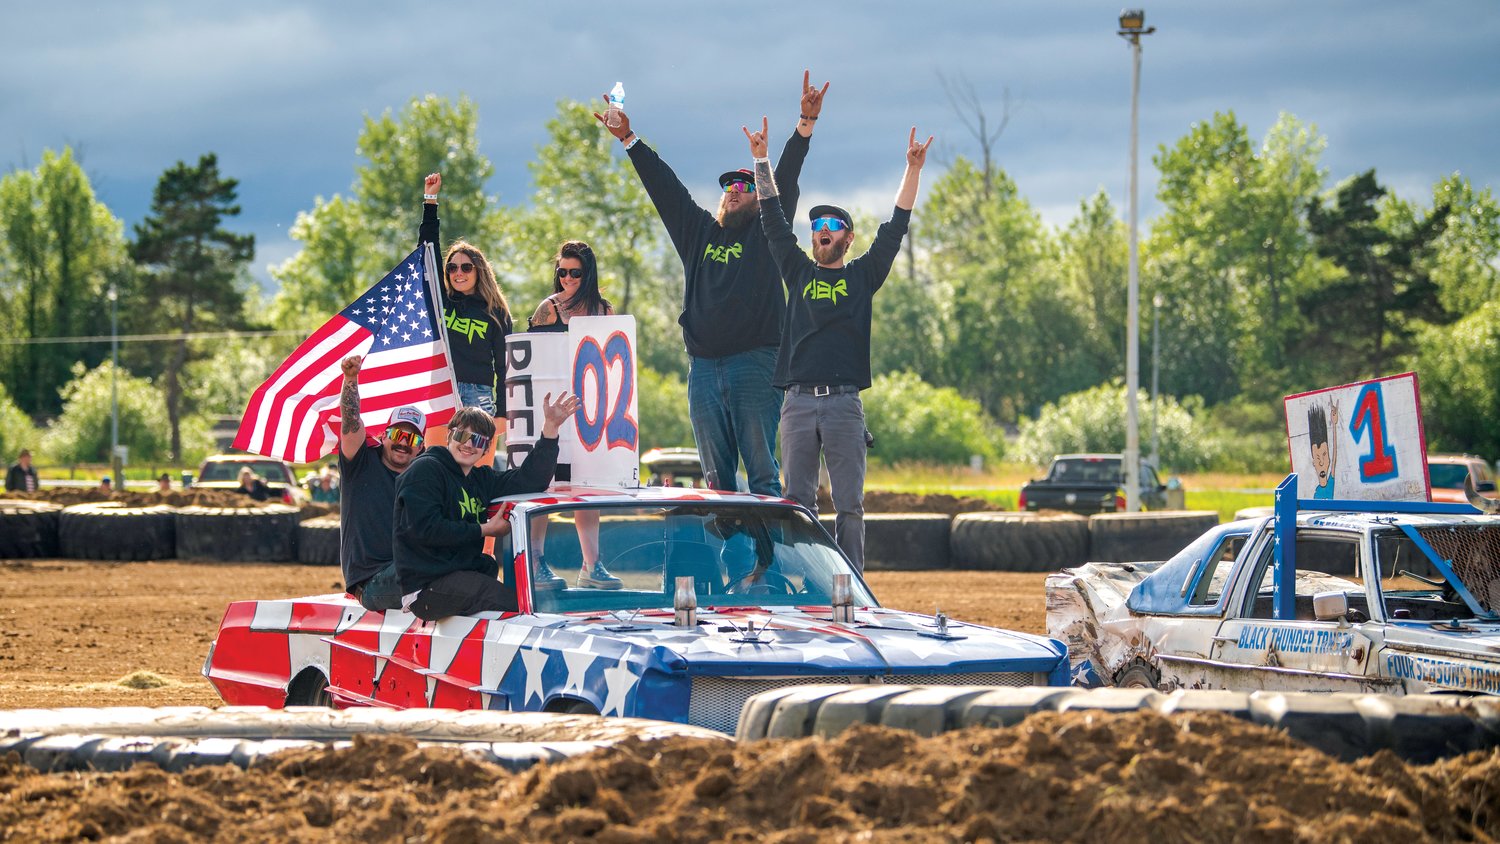 The HBR crew, and driver Brad Hunter, cheers with the crowd as their vehicle wins “prettiest car,” during the Summerfest Demolition Derby at the Southwest Washington Fairgrounds Sunday in Centralia.